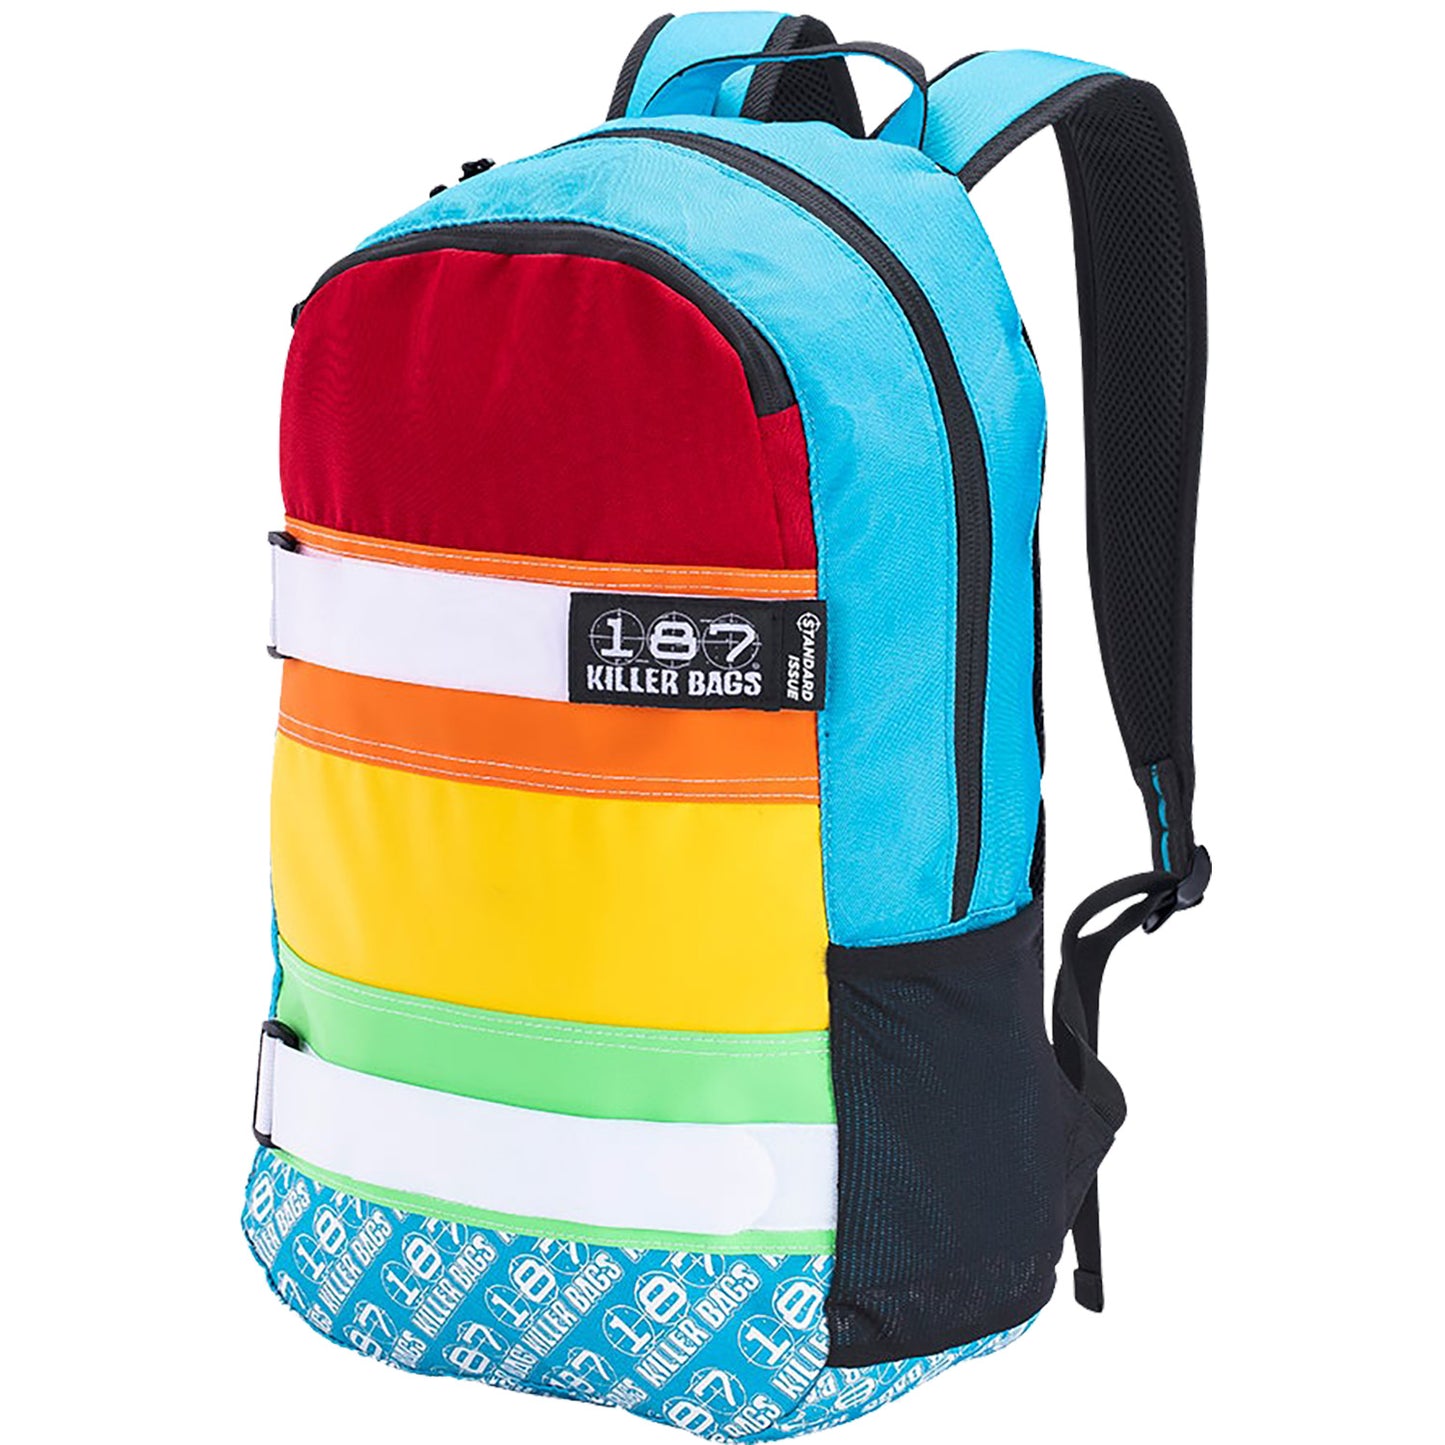 187 Killer Pads - Standard Issue Rainbow Backpack